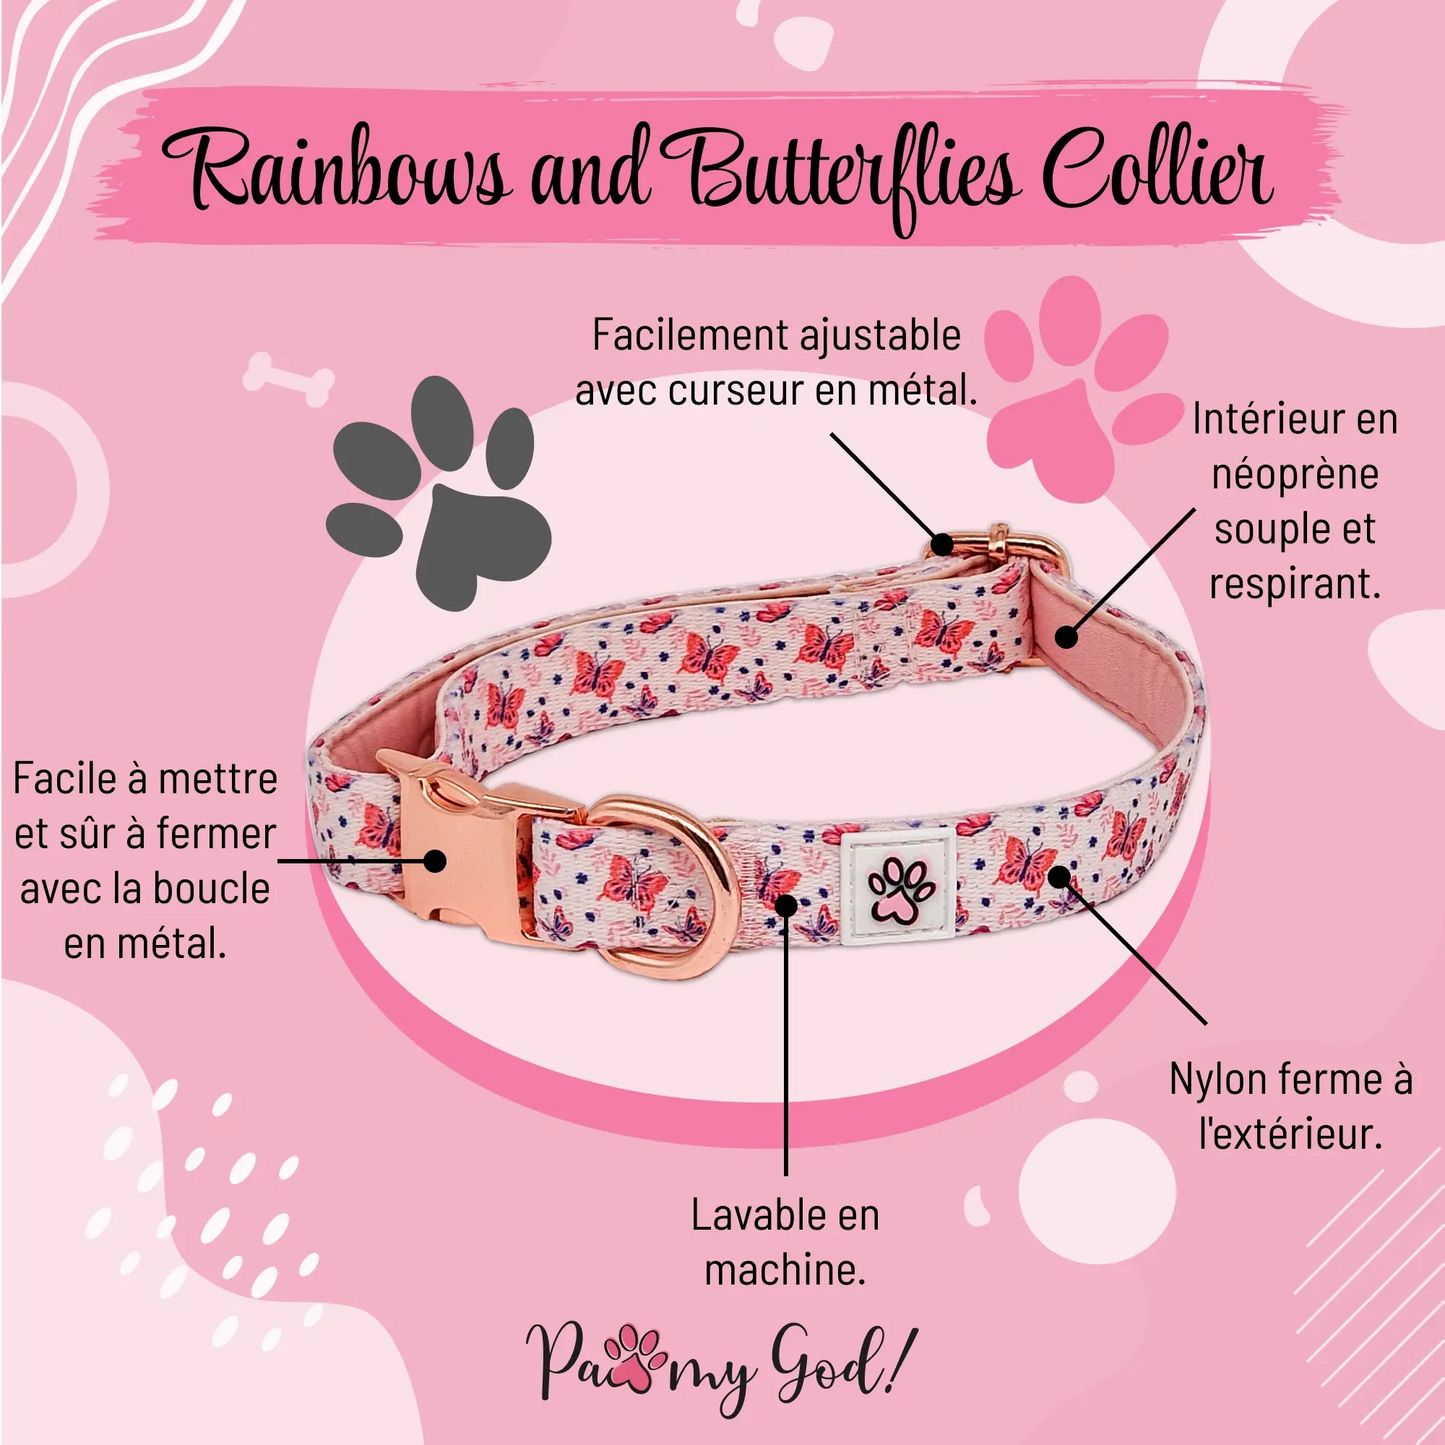 Rainbows and Butterflies Cloth Collar Features